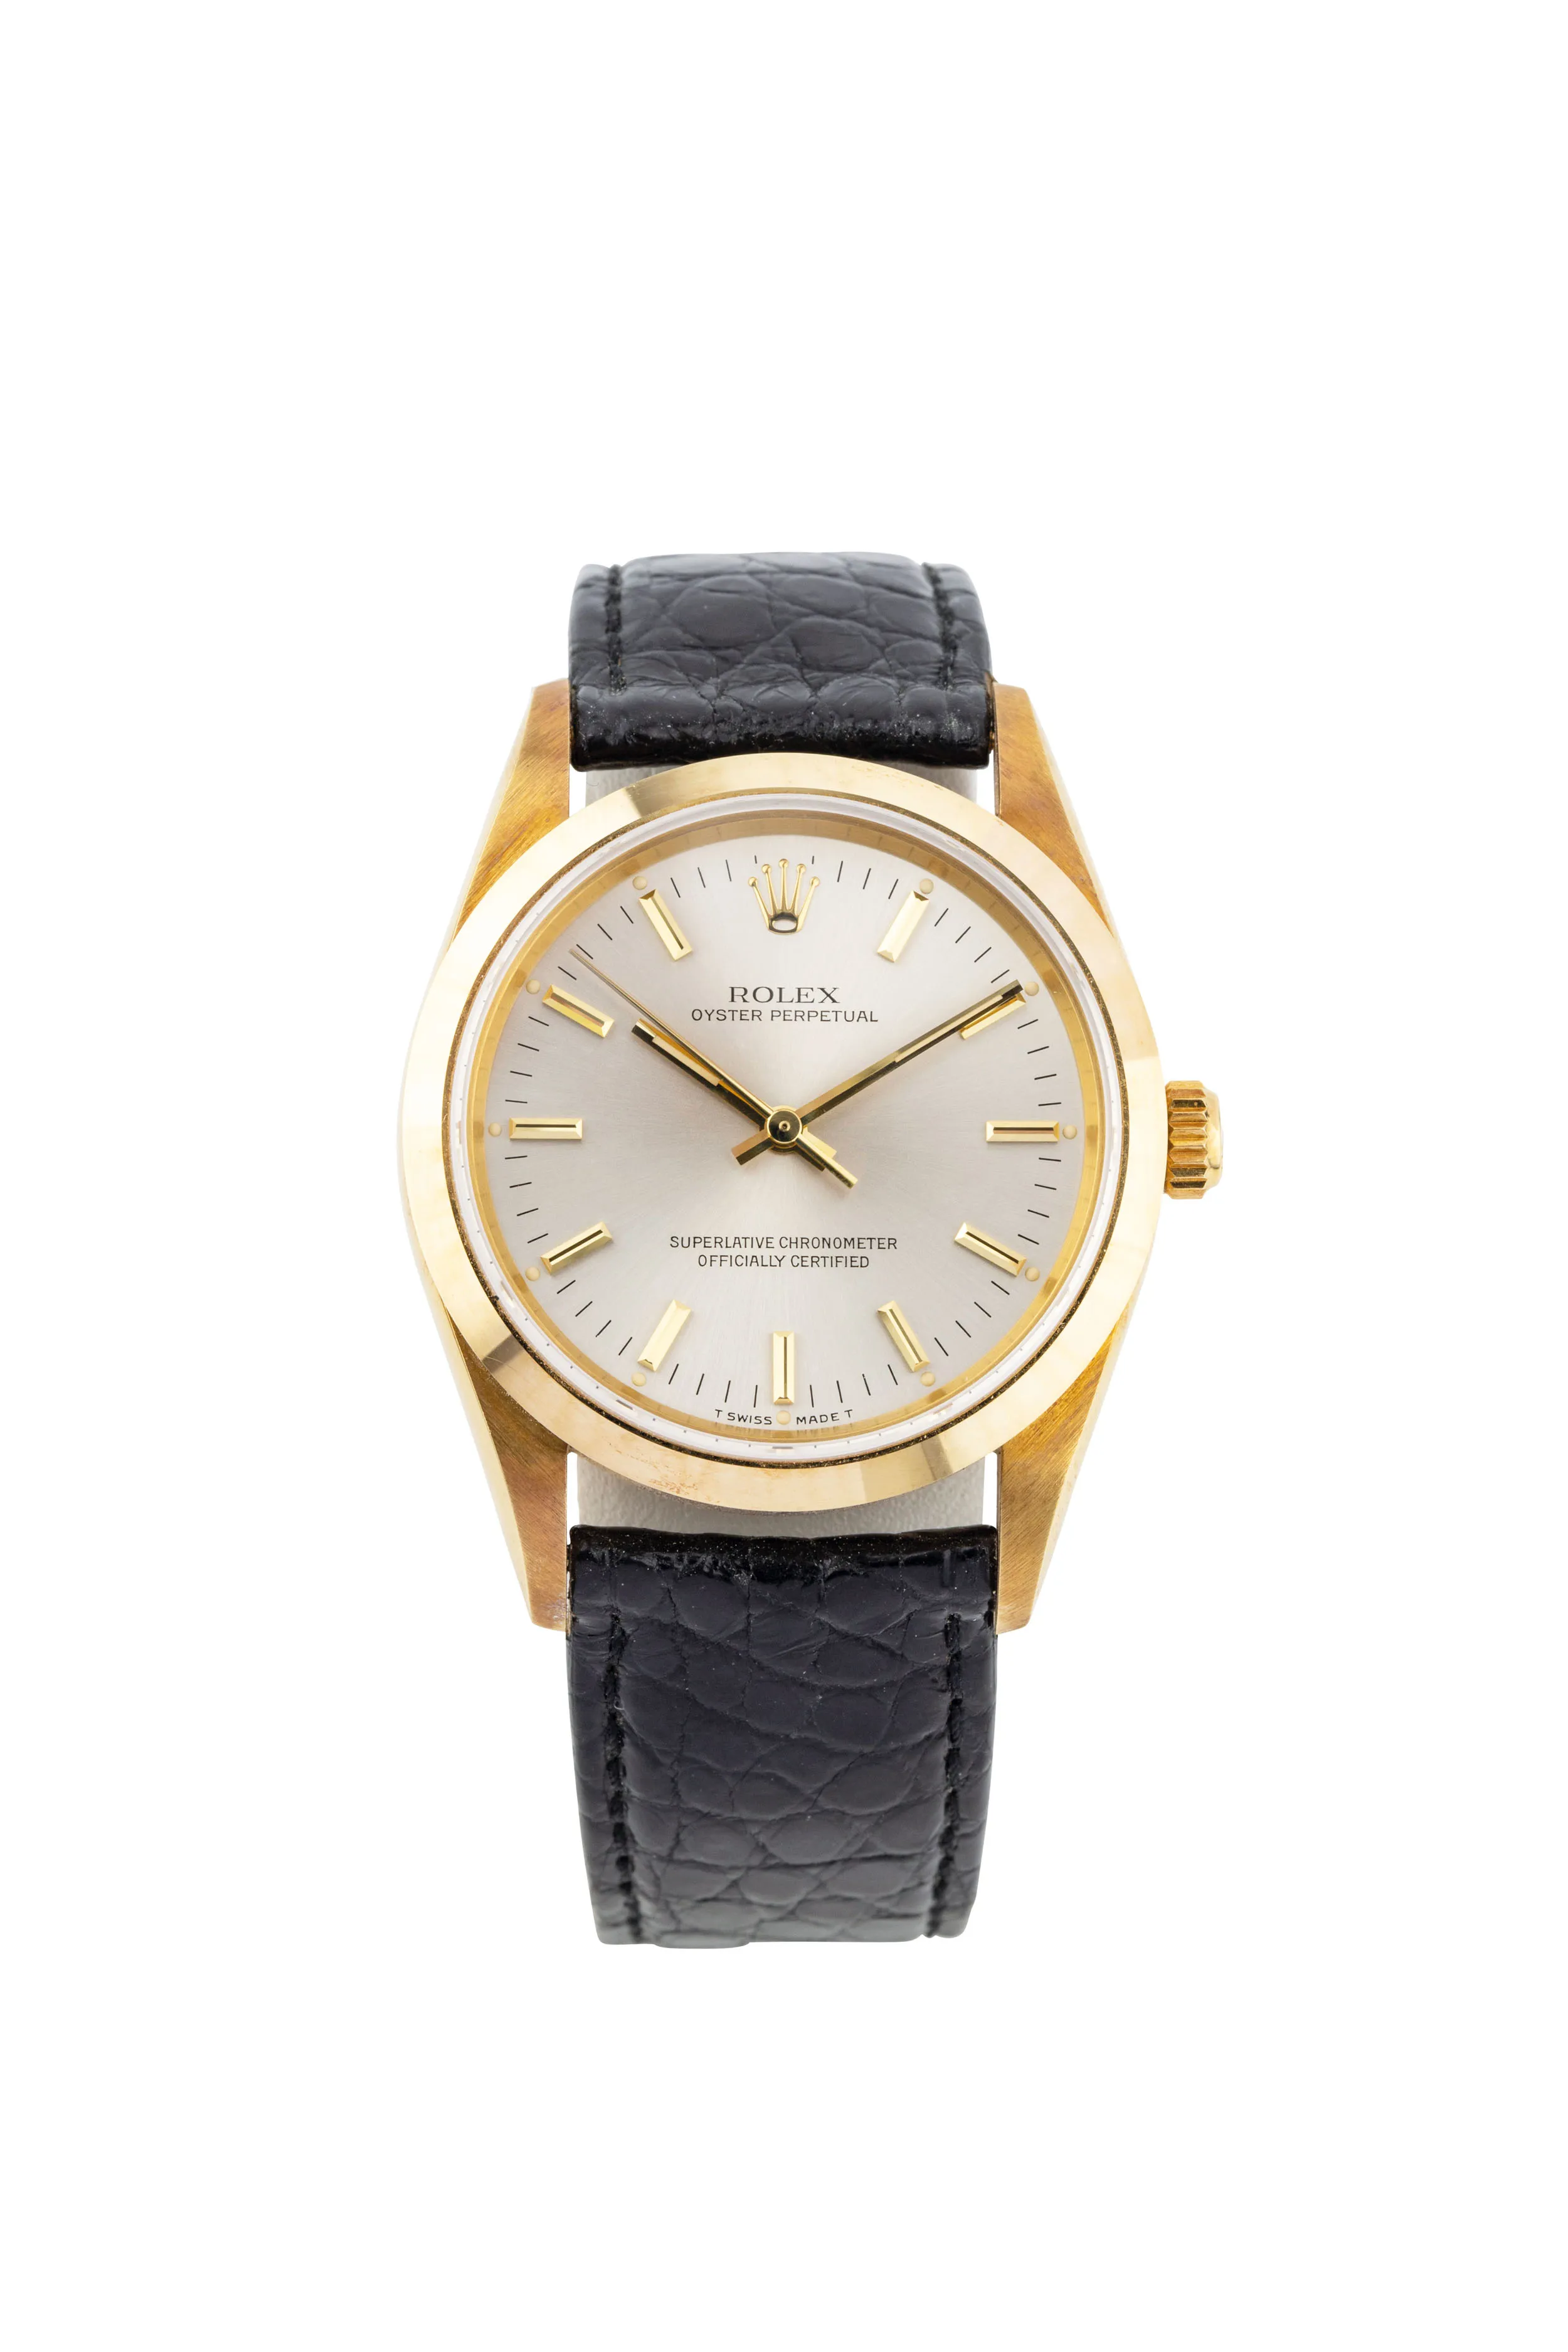 Rolex Oyster Perpetual 14208 34mm Yellow gold